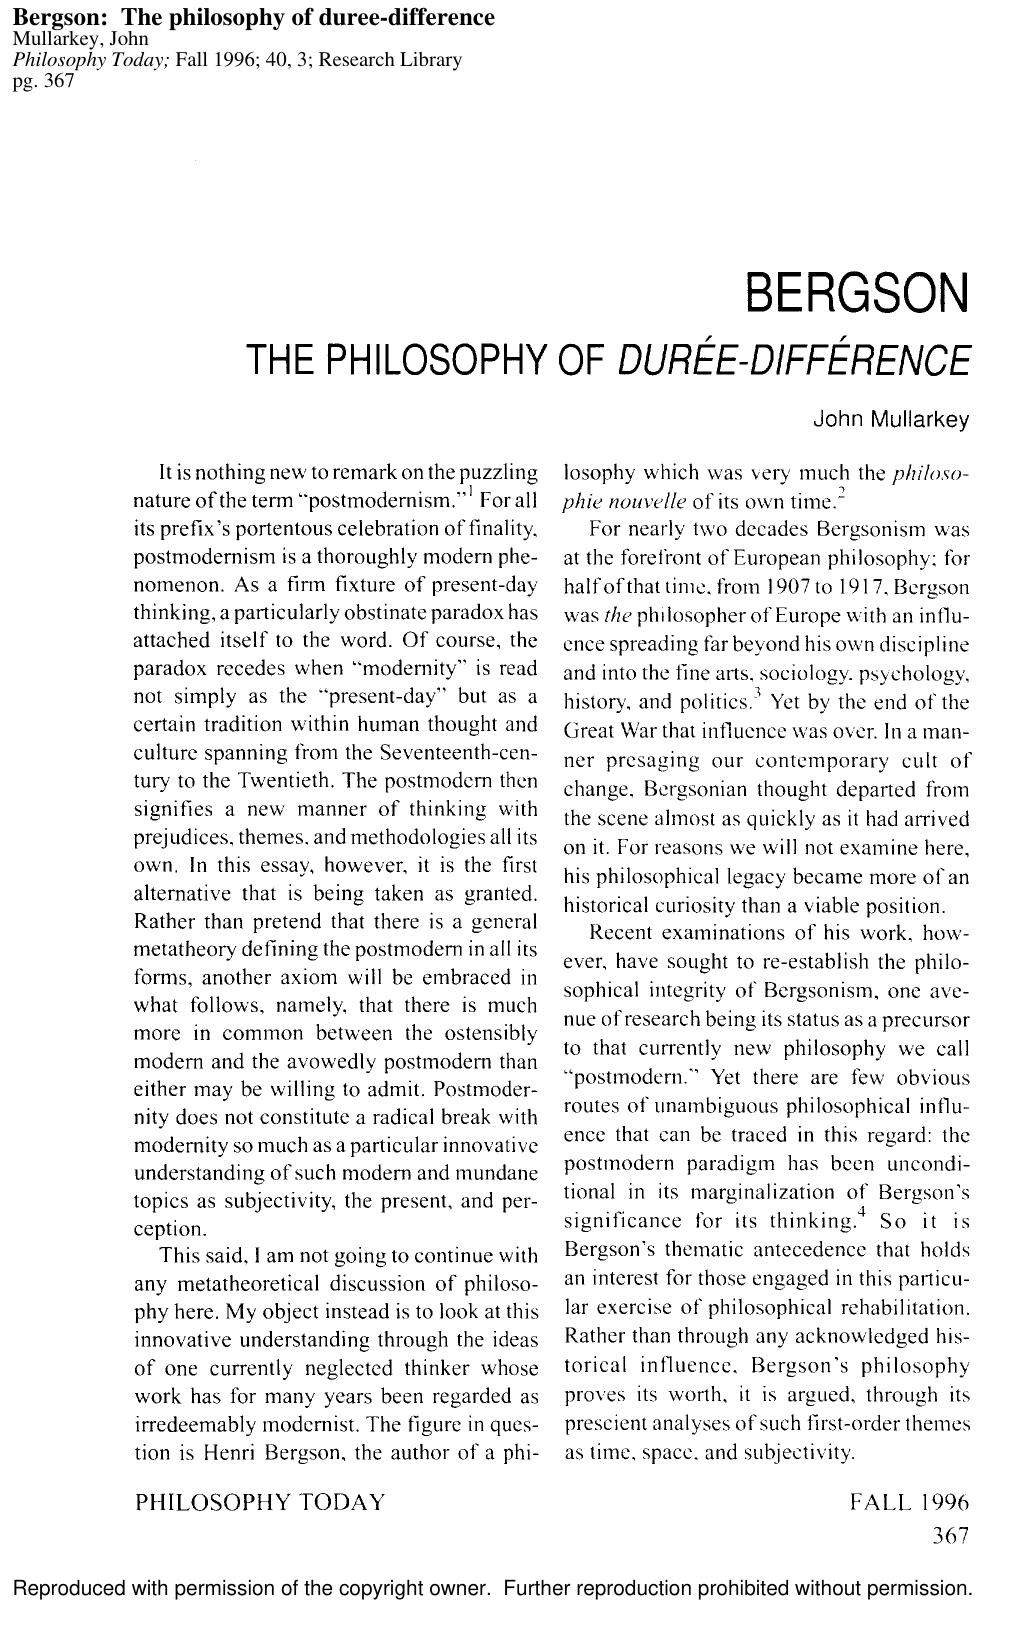 Bergson - The Philosophy Of Durée-Différence - Paper